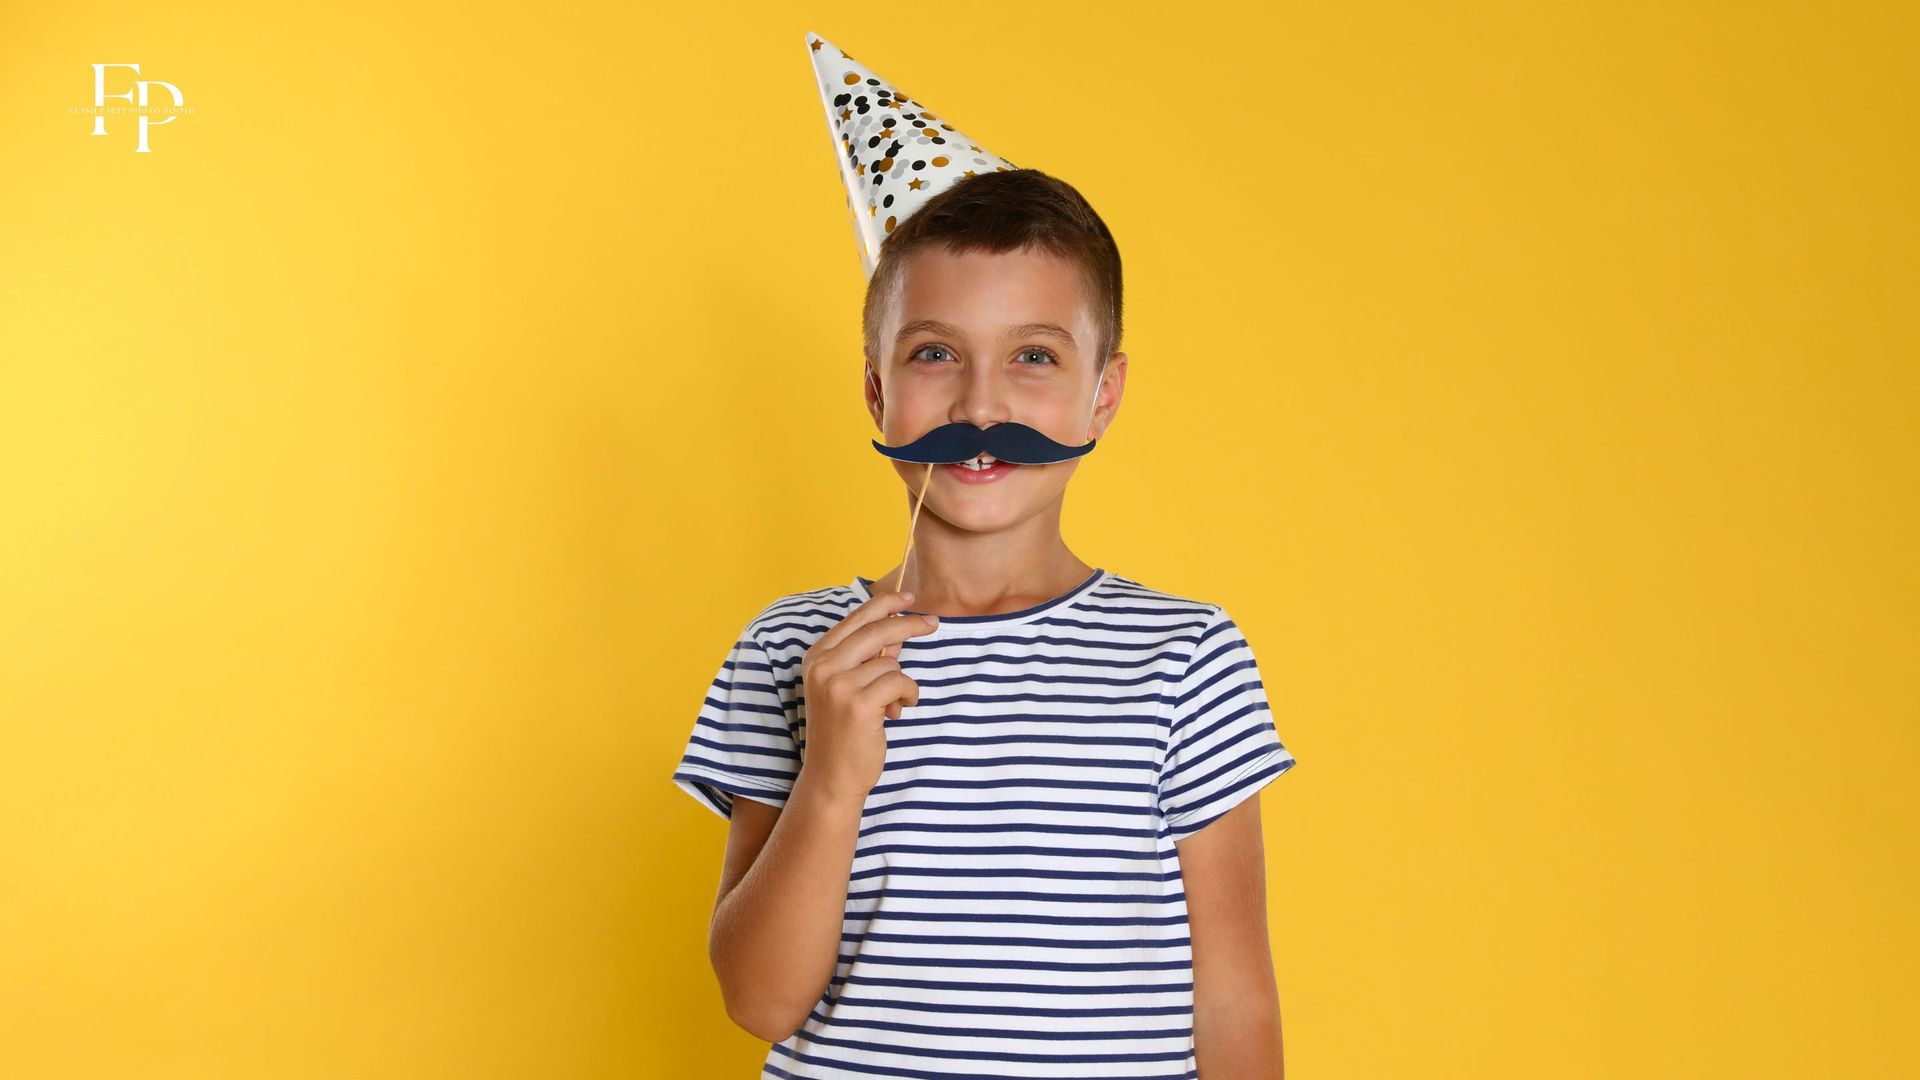 A boy enjoys playful moments with a mustache prop at the Flash Party photo booth during a birthday party in Dallas.